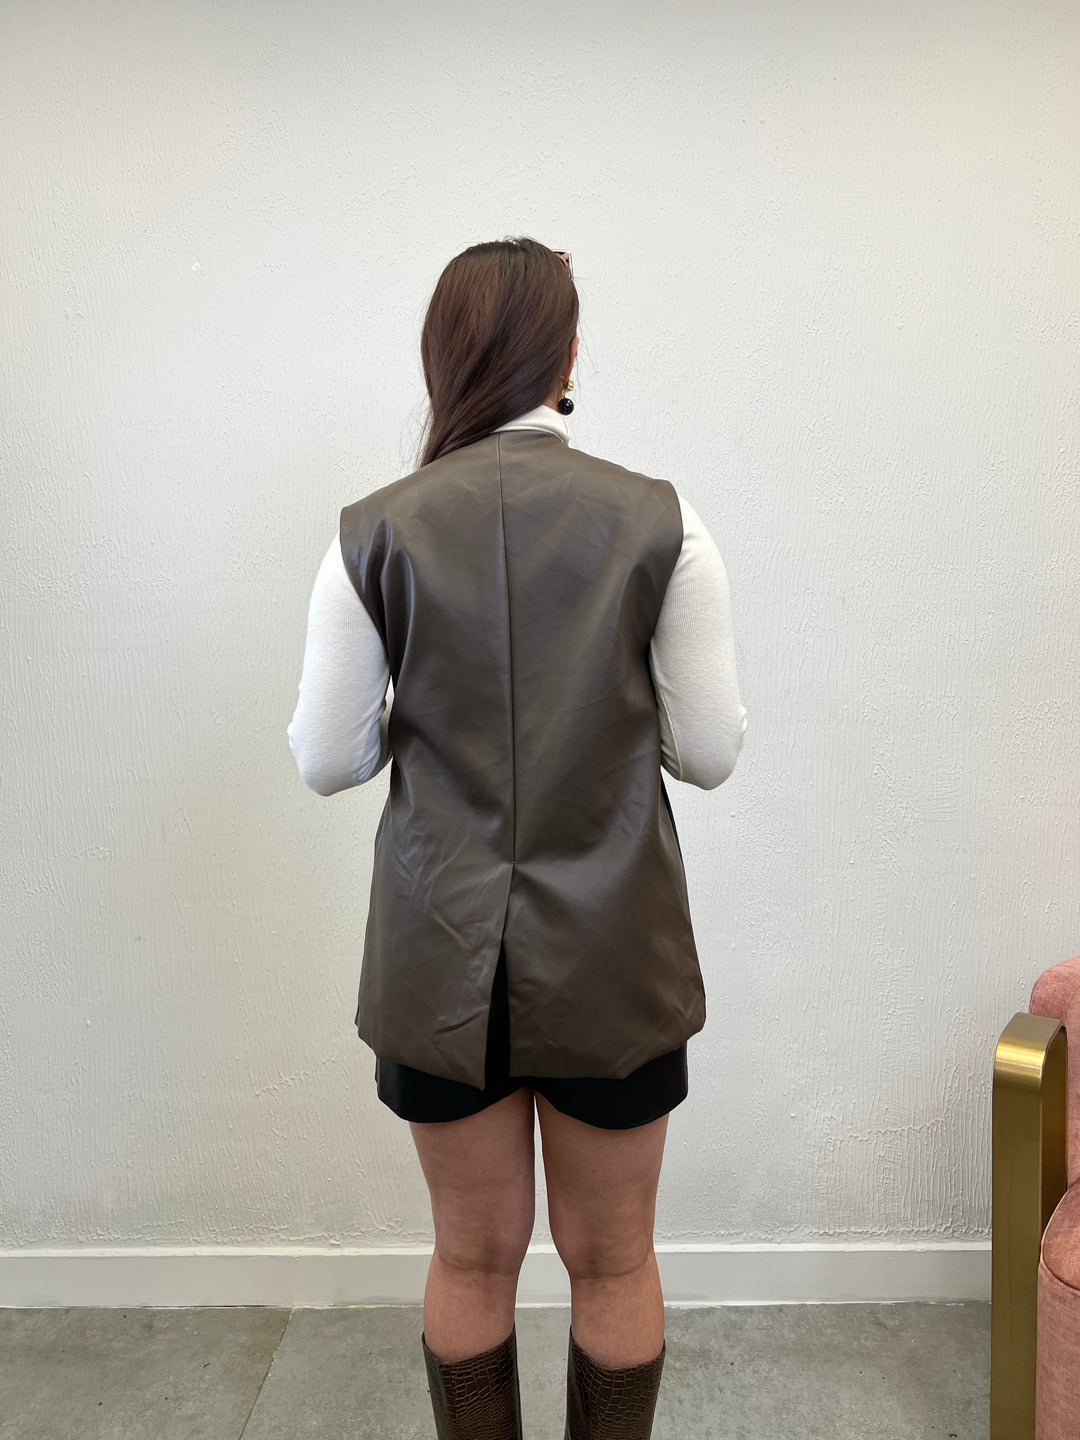 Sleeveless brown leather jacket with belt